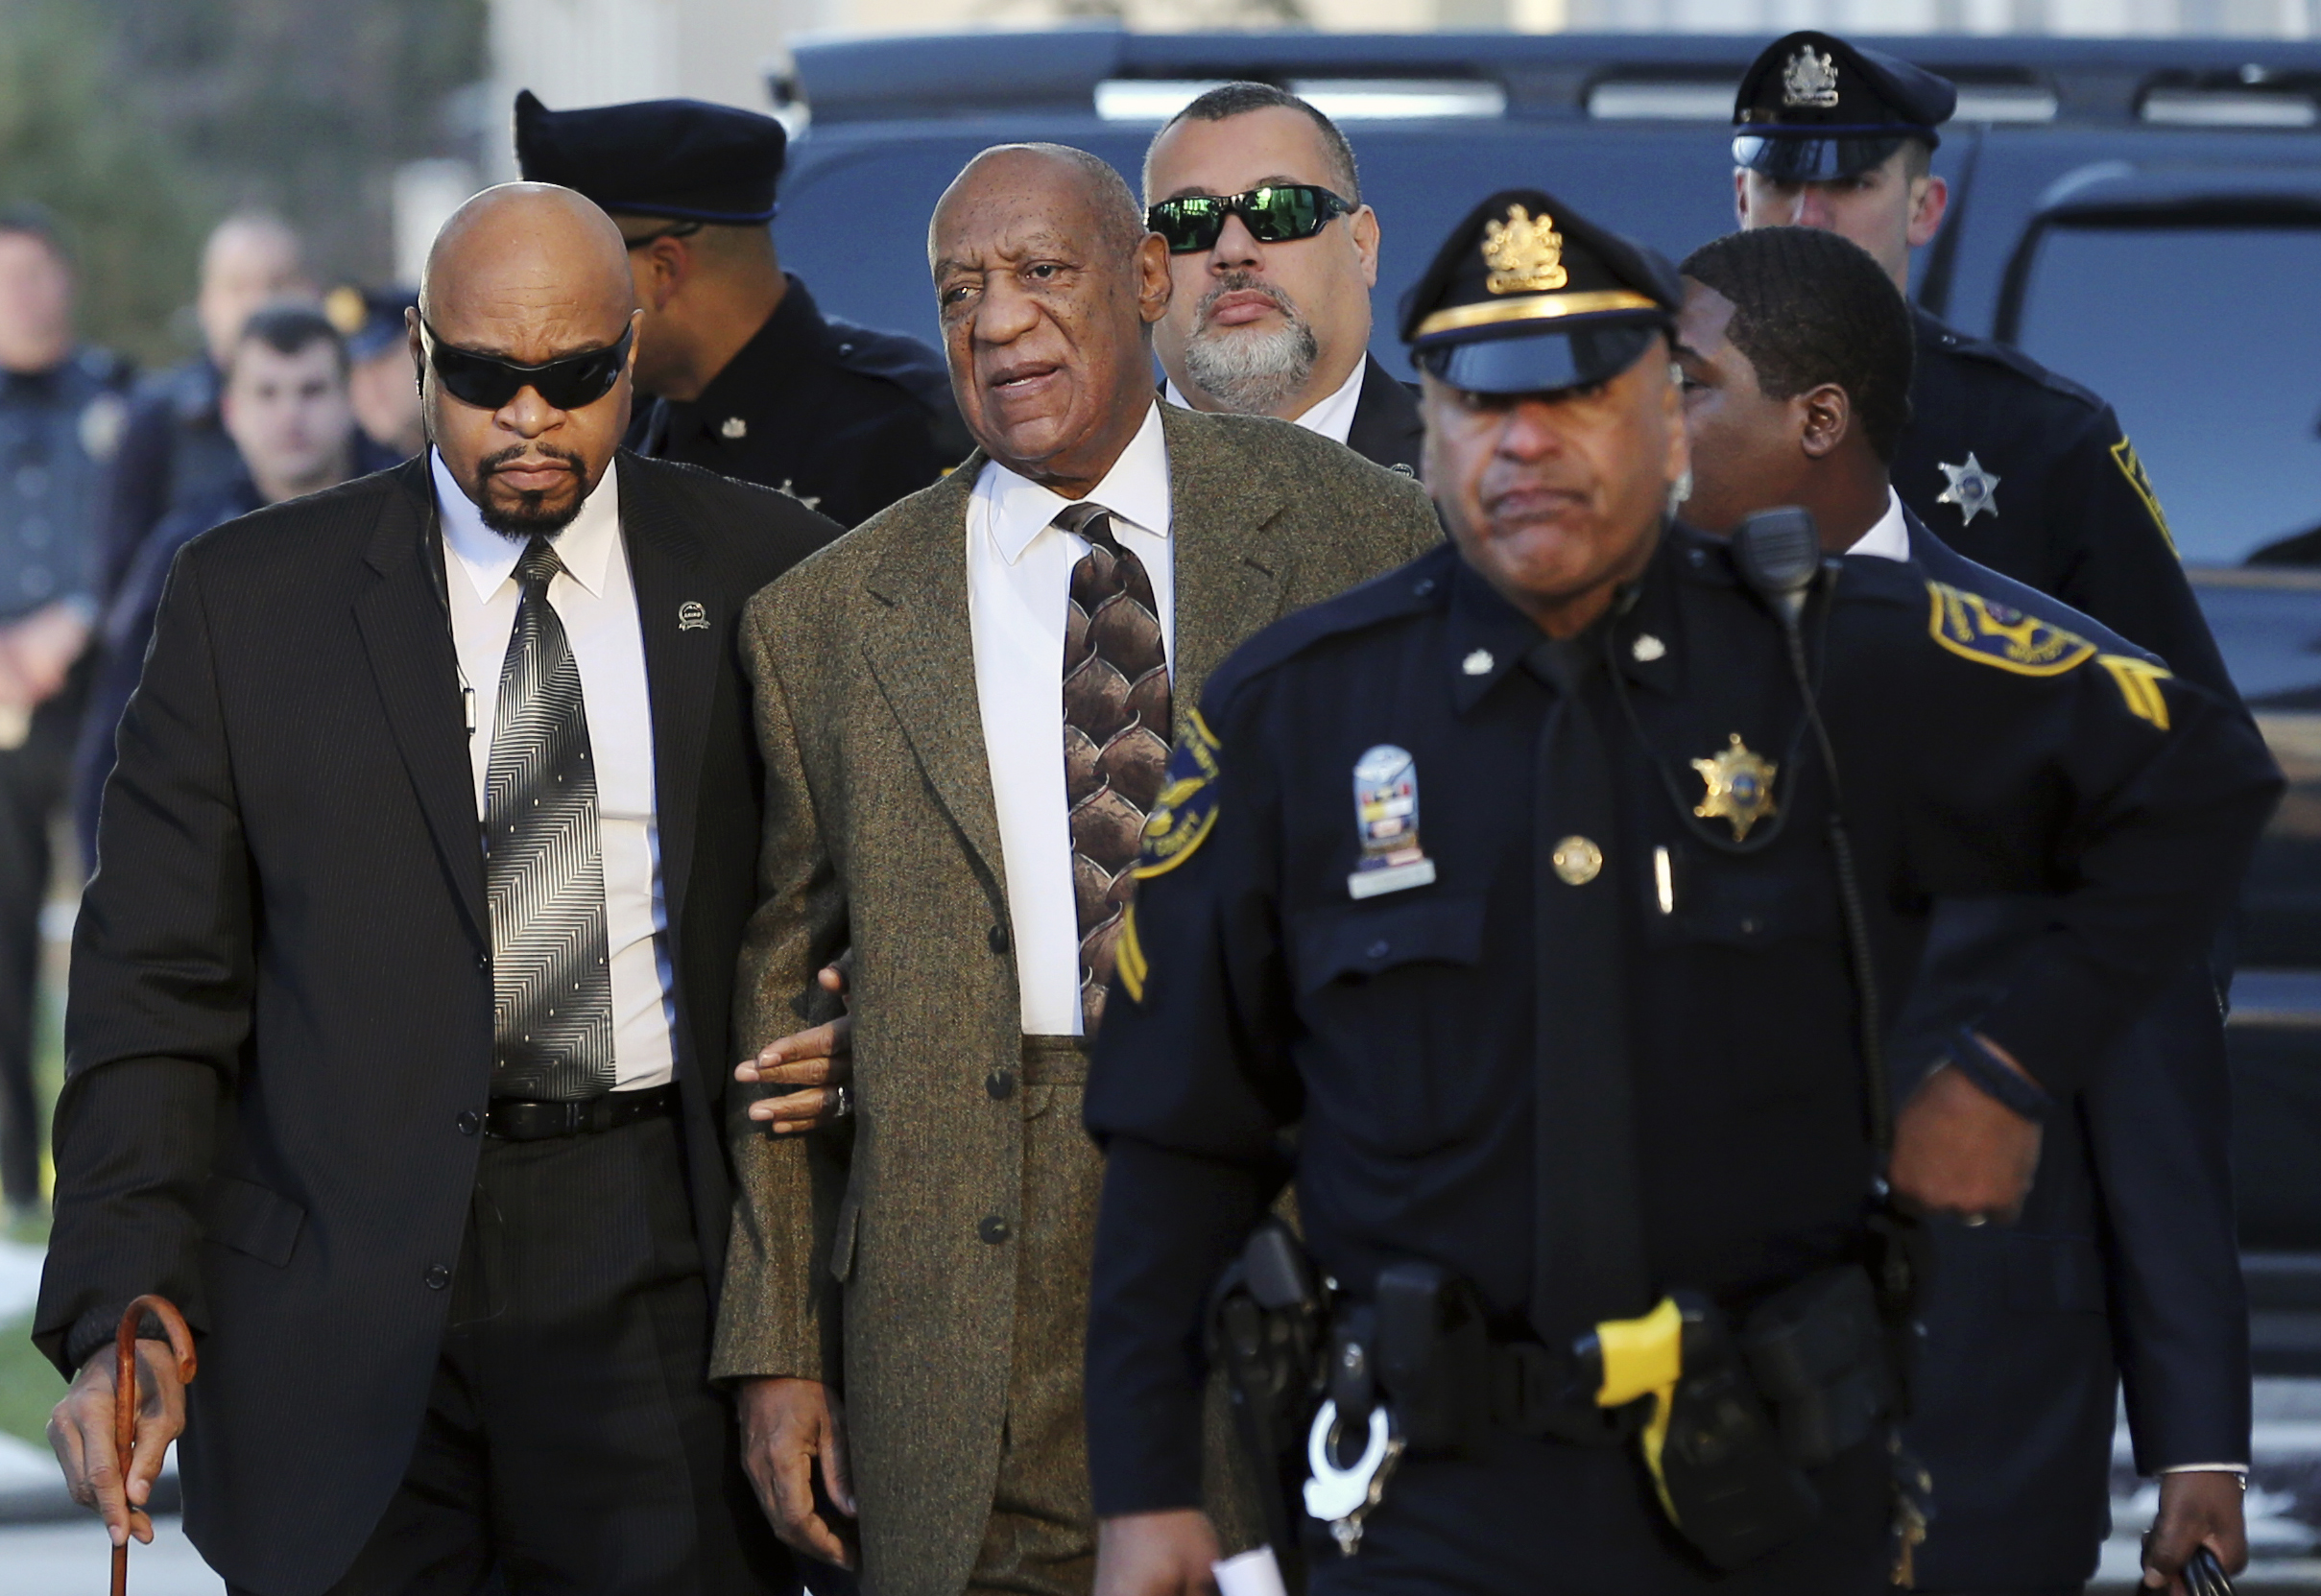 PHOTO: Bill Cosby arrives for a court appearance, Feb. 2, 2016, in Norristown, Pa.